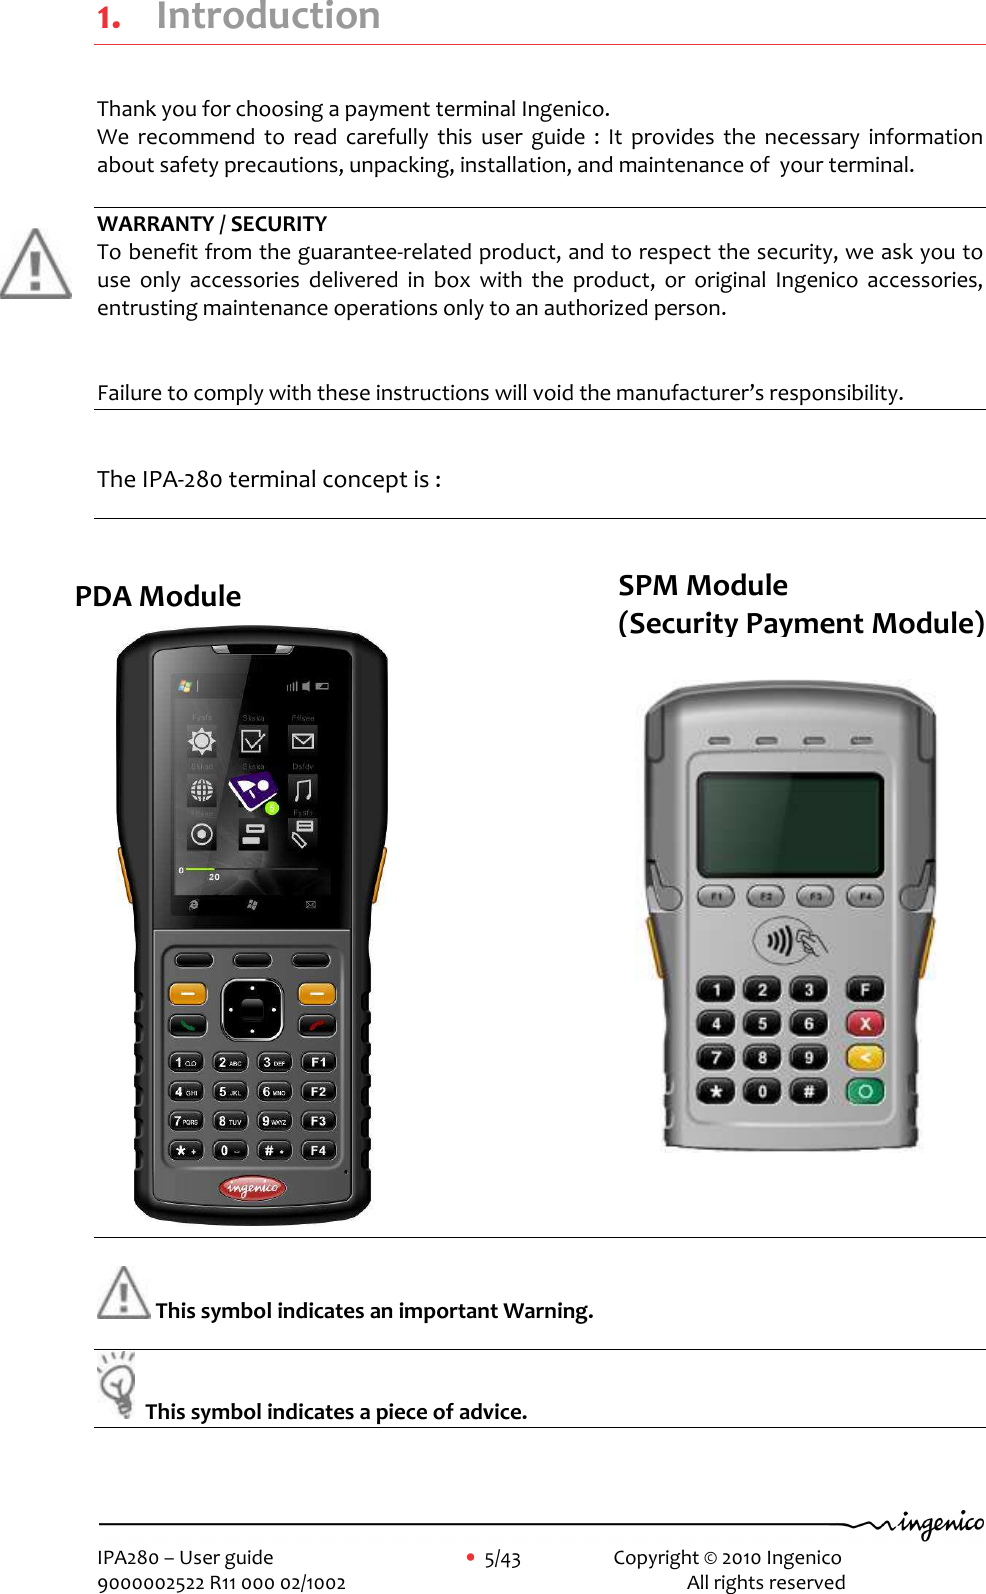     IPA280 – User guide      •  5/43     Copyright © 2010 Ingenico   9000002522 R11 000 02/1002          All rights reserved        1. Introduction Thank you for choosing a payment terminal Ingenico. We  recommend  to  read  carefully  this  user  guide  :  It  provides  the  necessary  information about safety precautions, unpacking, installation, and maintenance of  your terminal.  WARRANTY / SECURITY To benefit from the guarantee-related product, and to respect the security, we ask you to use  only  accessories  delivered  in  box  with  the  product,  or  original  Ingenico  accessories,  entrusting maintenance operations only to an authorized person.  Failure to comply with these instructions will void the manufacturer’s responsibility.  The IPA-280 terminal concept is :                 This symbol indicates an important Warning.    This symbol indicates a piece of advice.   PDA Module   SPM Module  (Security Payment Module) 